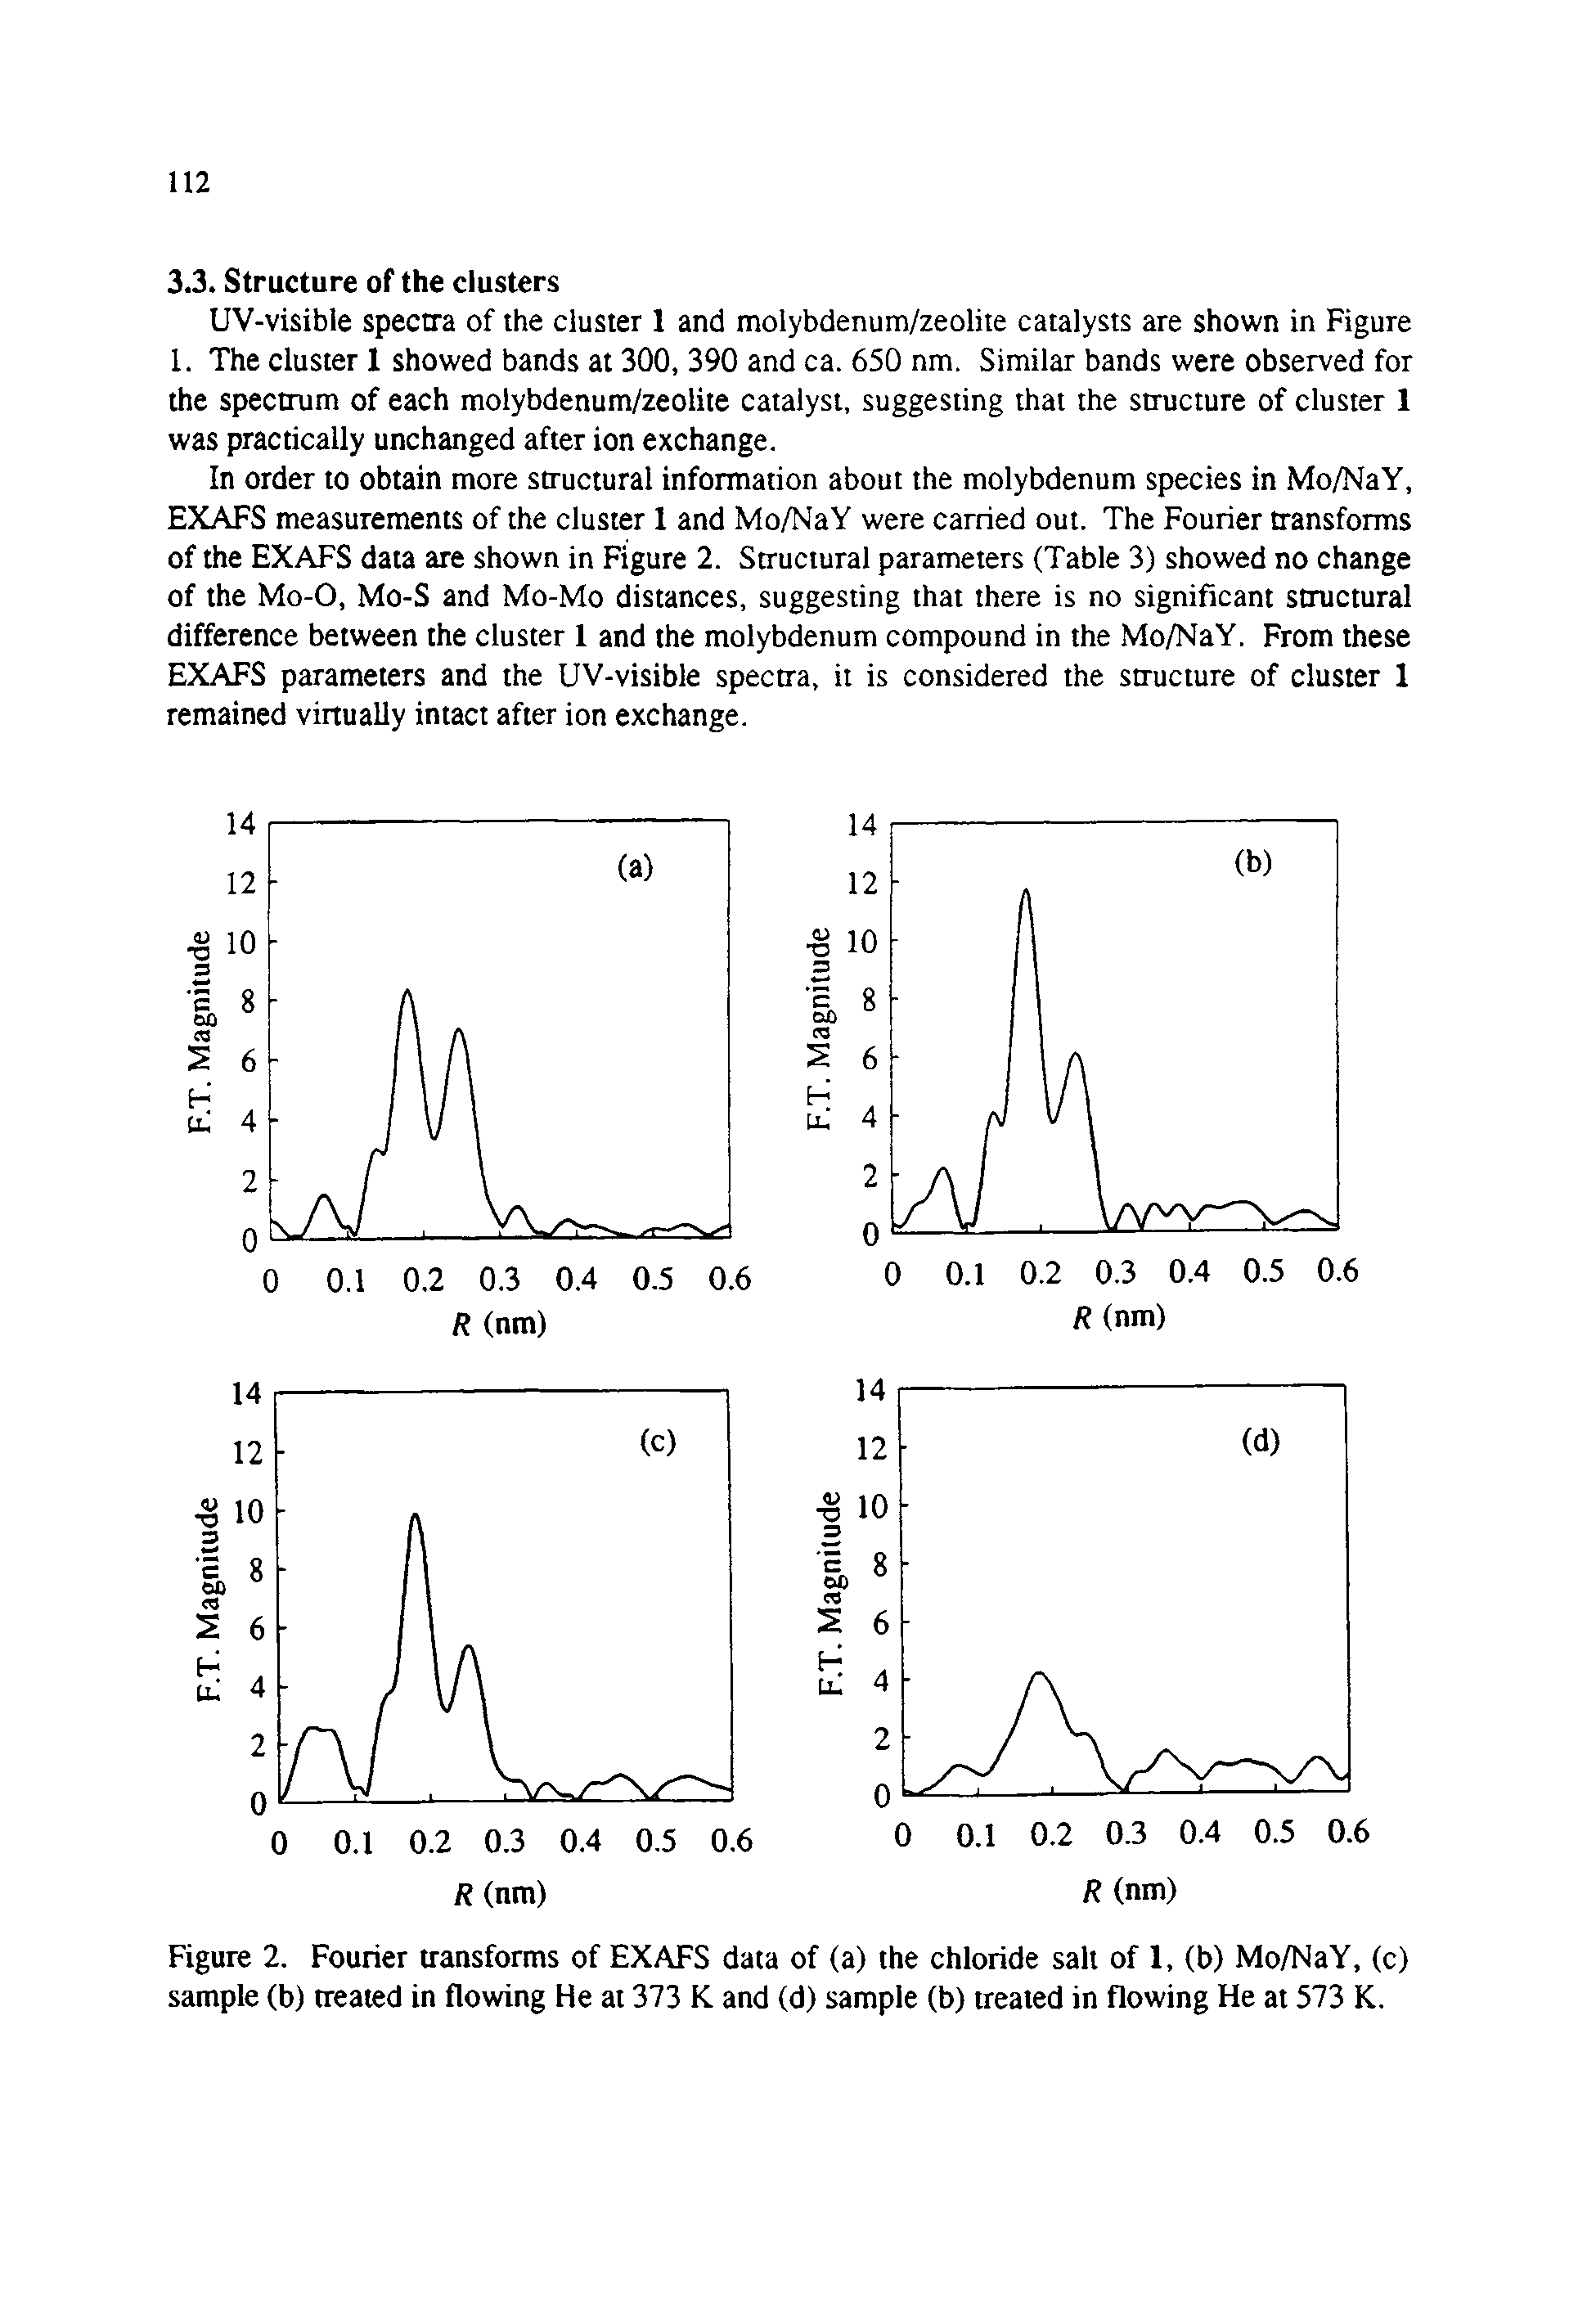 Figure 2. Fourier transforms of EXAFS data of (a) the chloride salt of 1, (b) Mo/NaY, (c) sample (b) treated in flowing He at 373 K and (d) sample (b) treated in flowing He at 573 K.